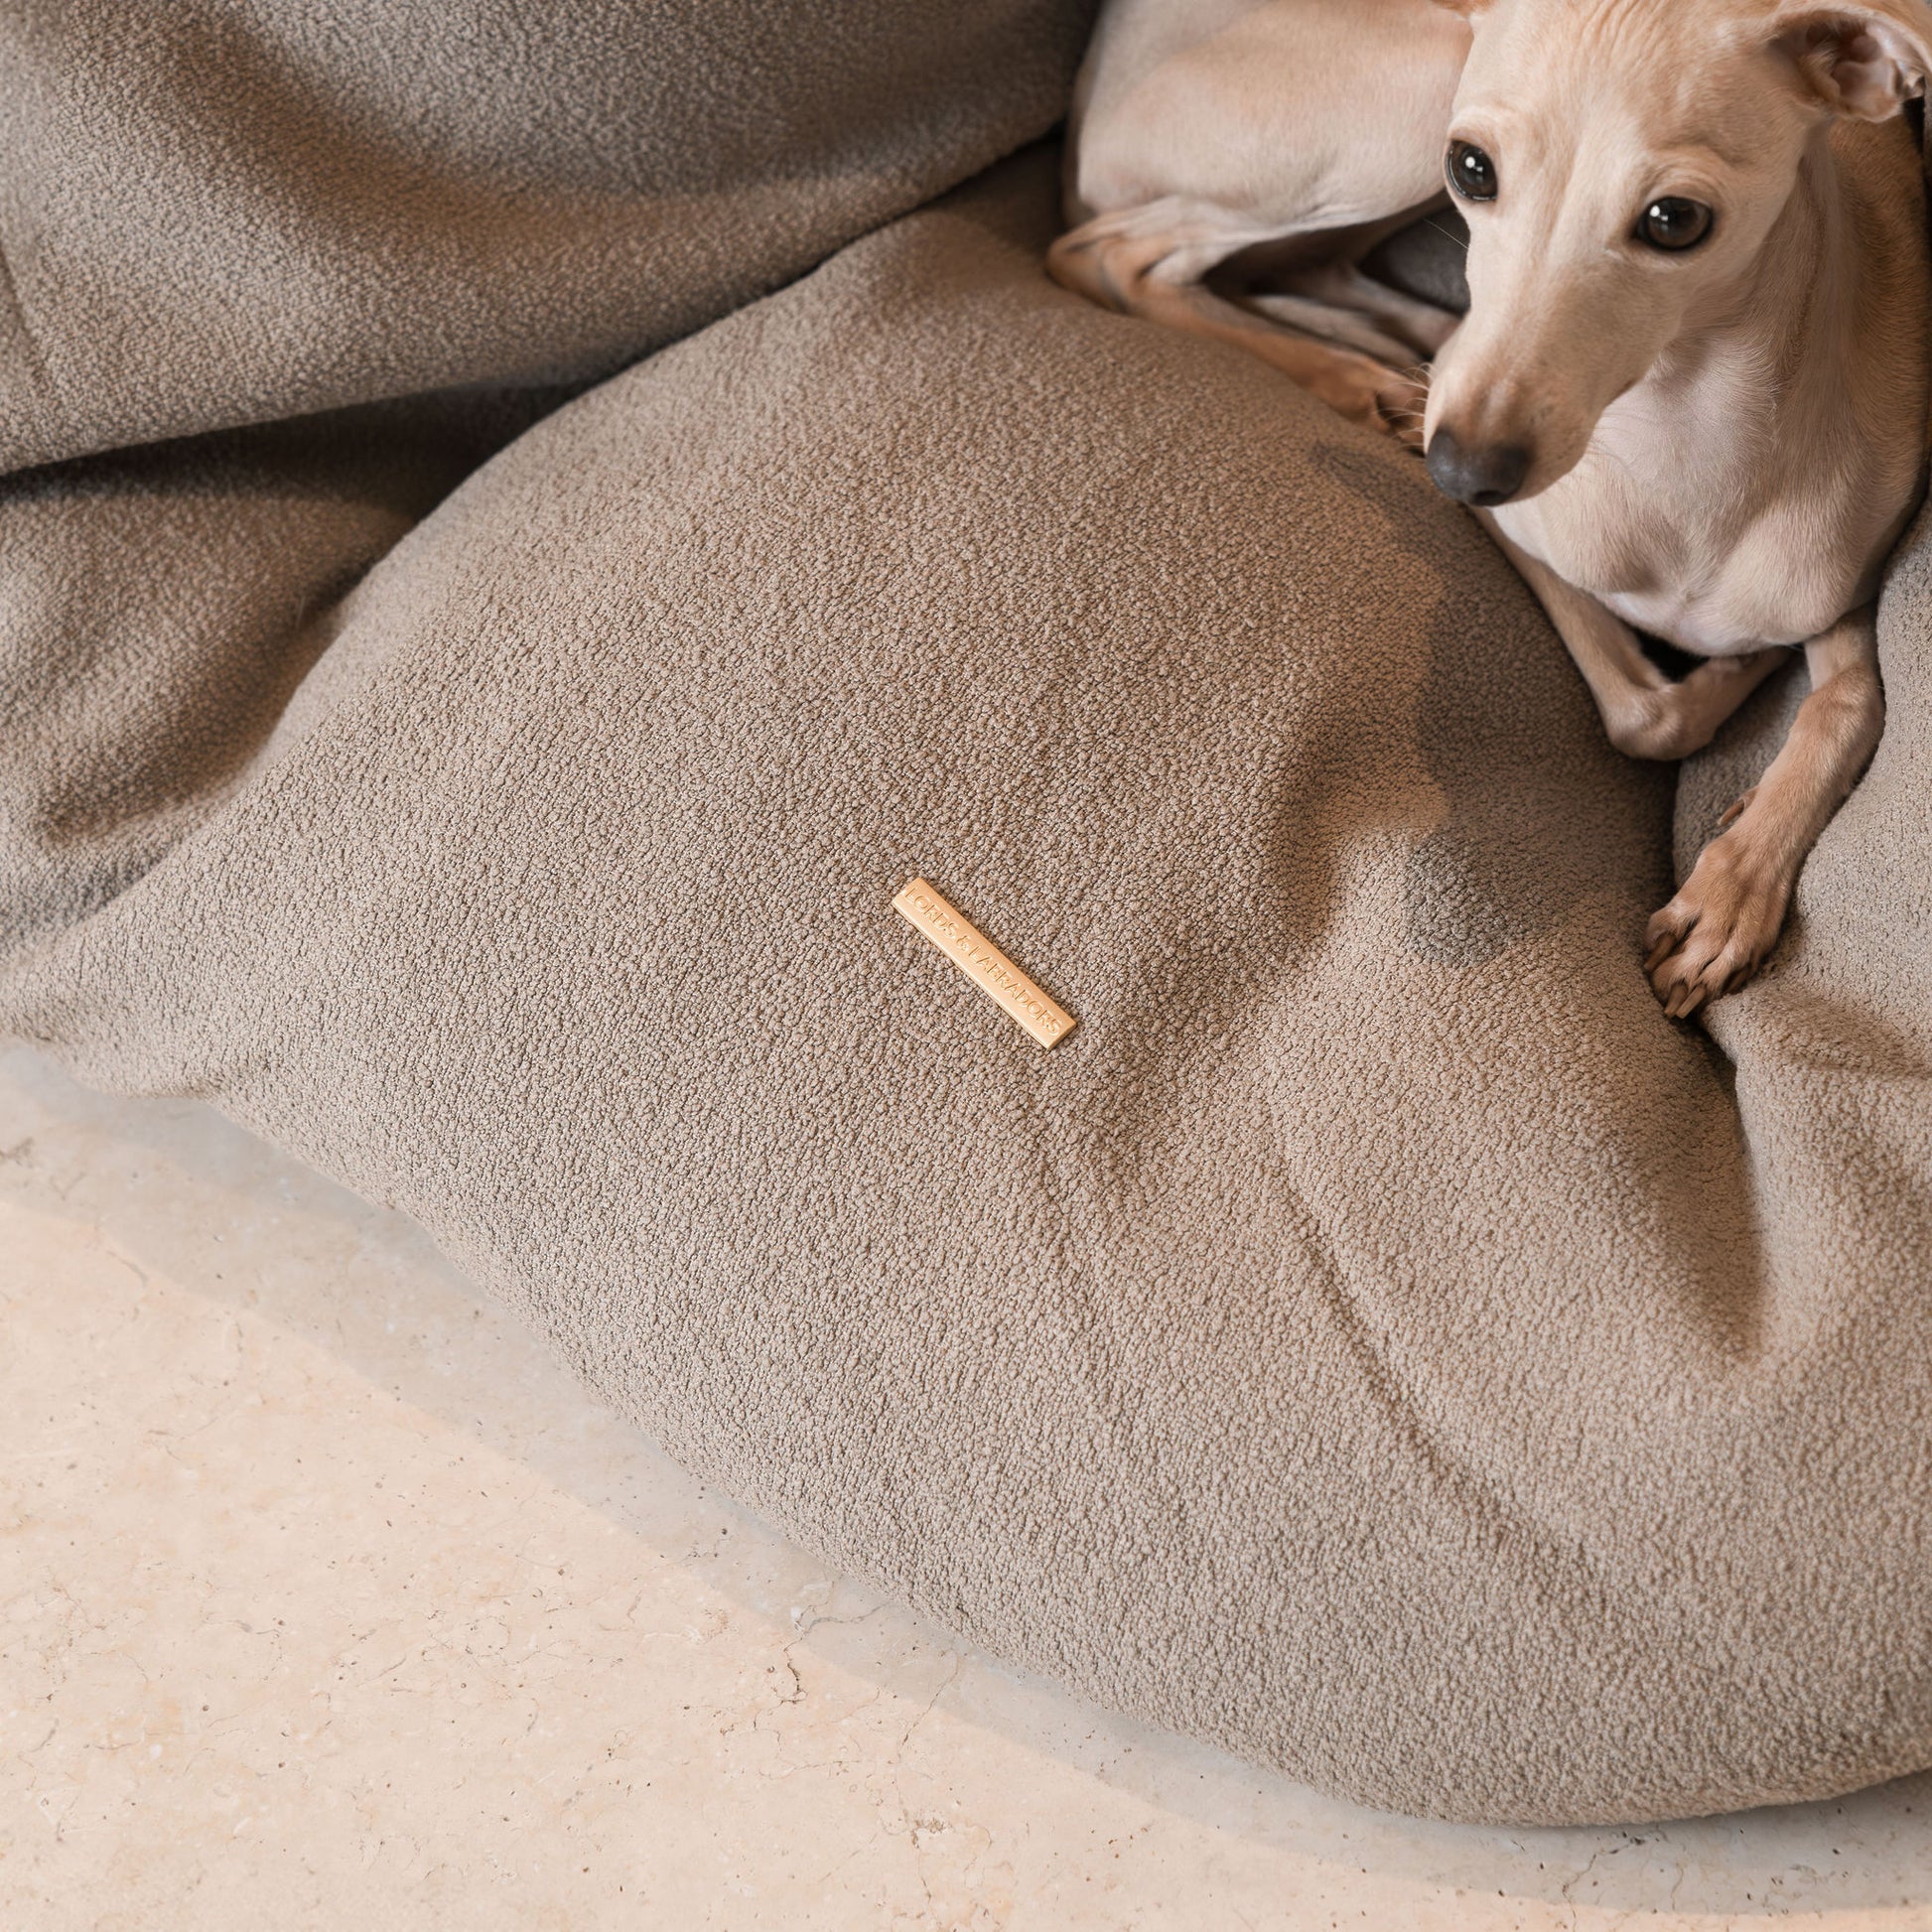 Luxury Dog Cushions & Beds, in Squash 'Em in Putty, The Perfect Snuggly Cave For Dogs To Burrow! Available Now at Lords & Labradors